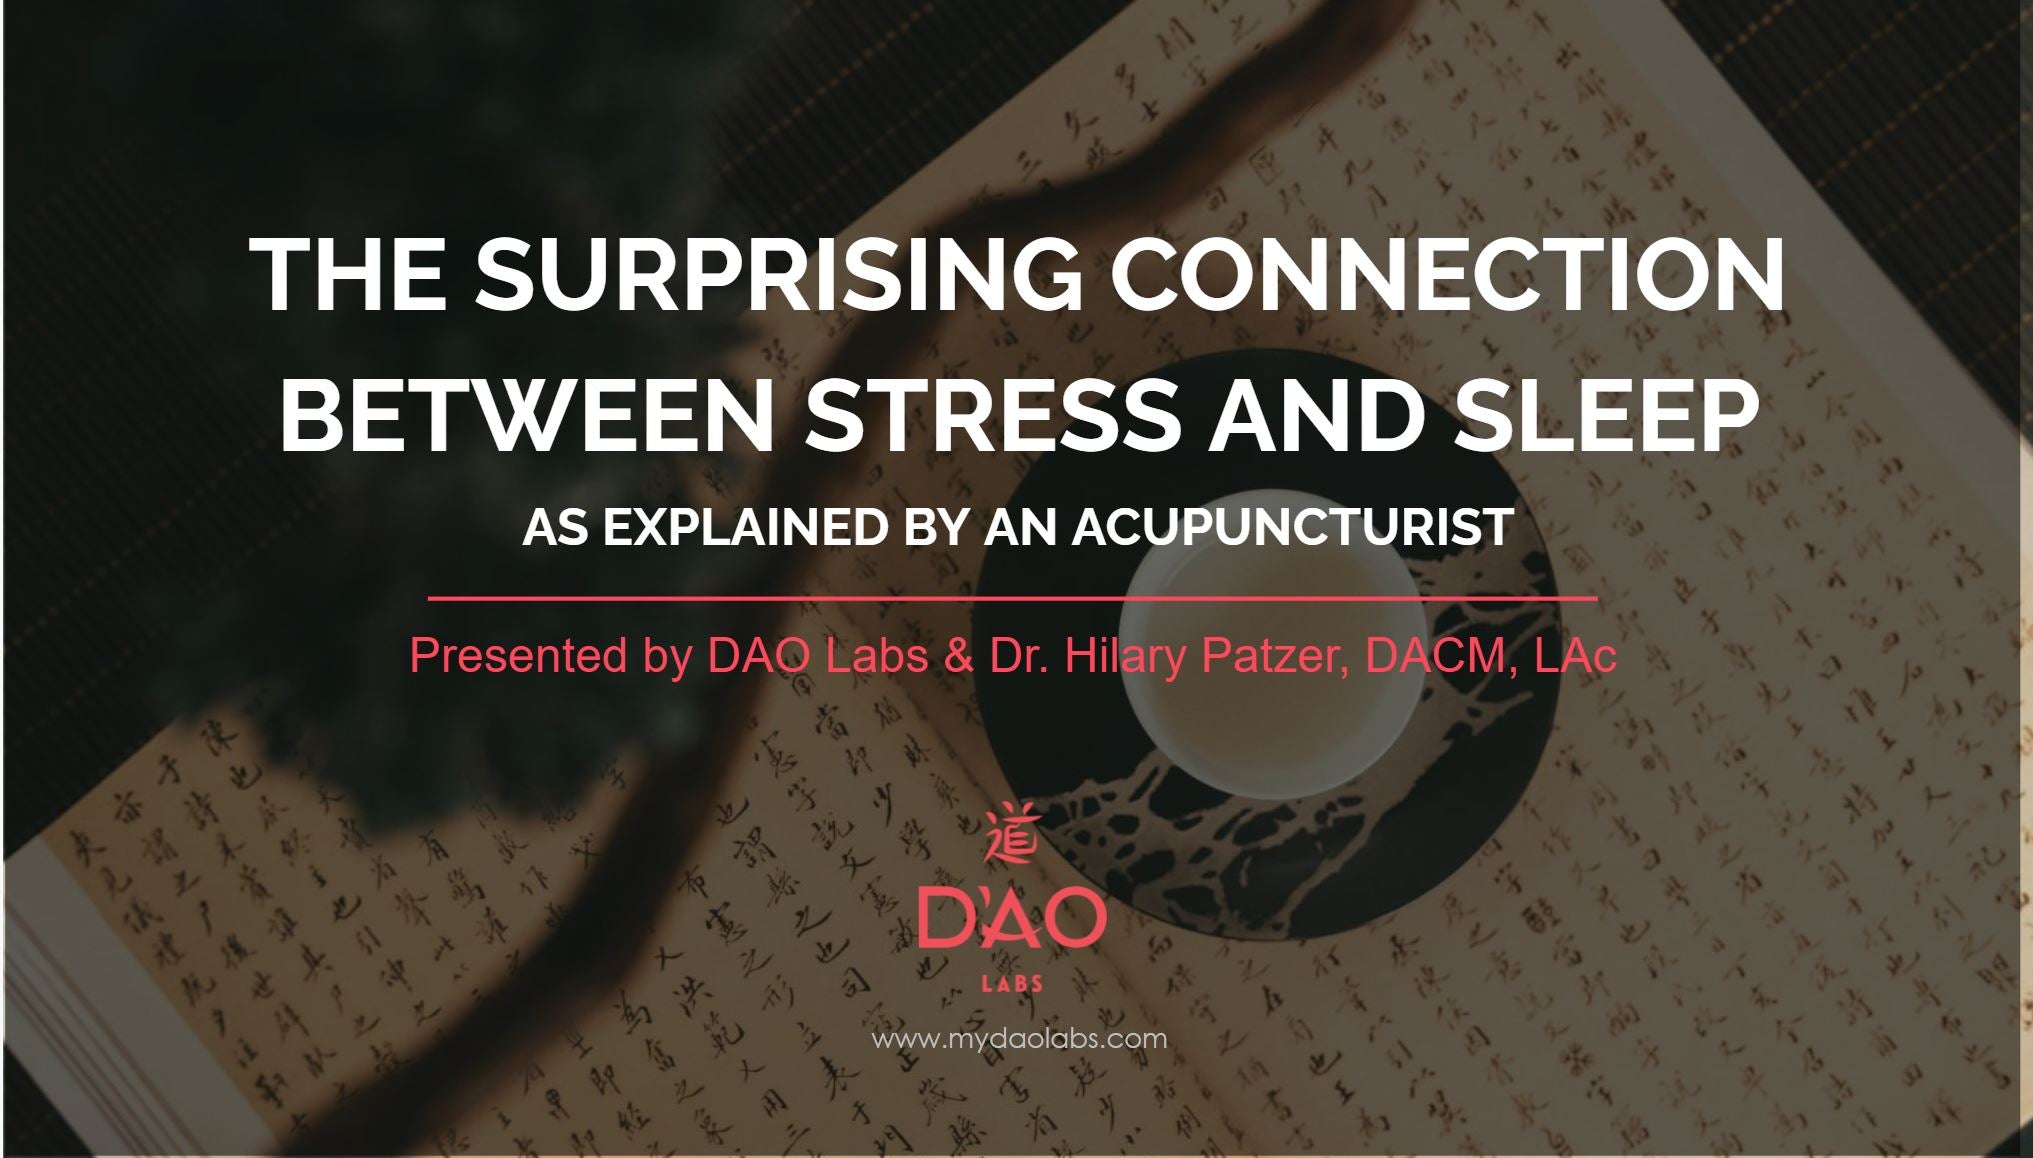 The Connection Between Stress & Sleep - As Explained by an Acupuncturist